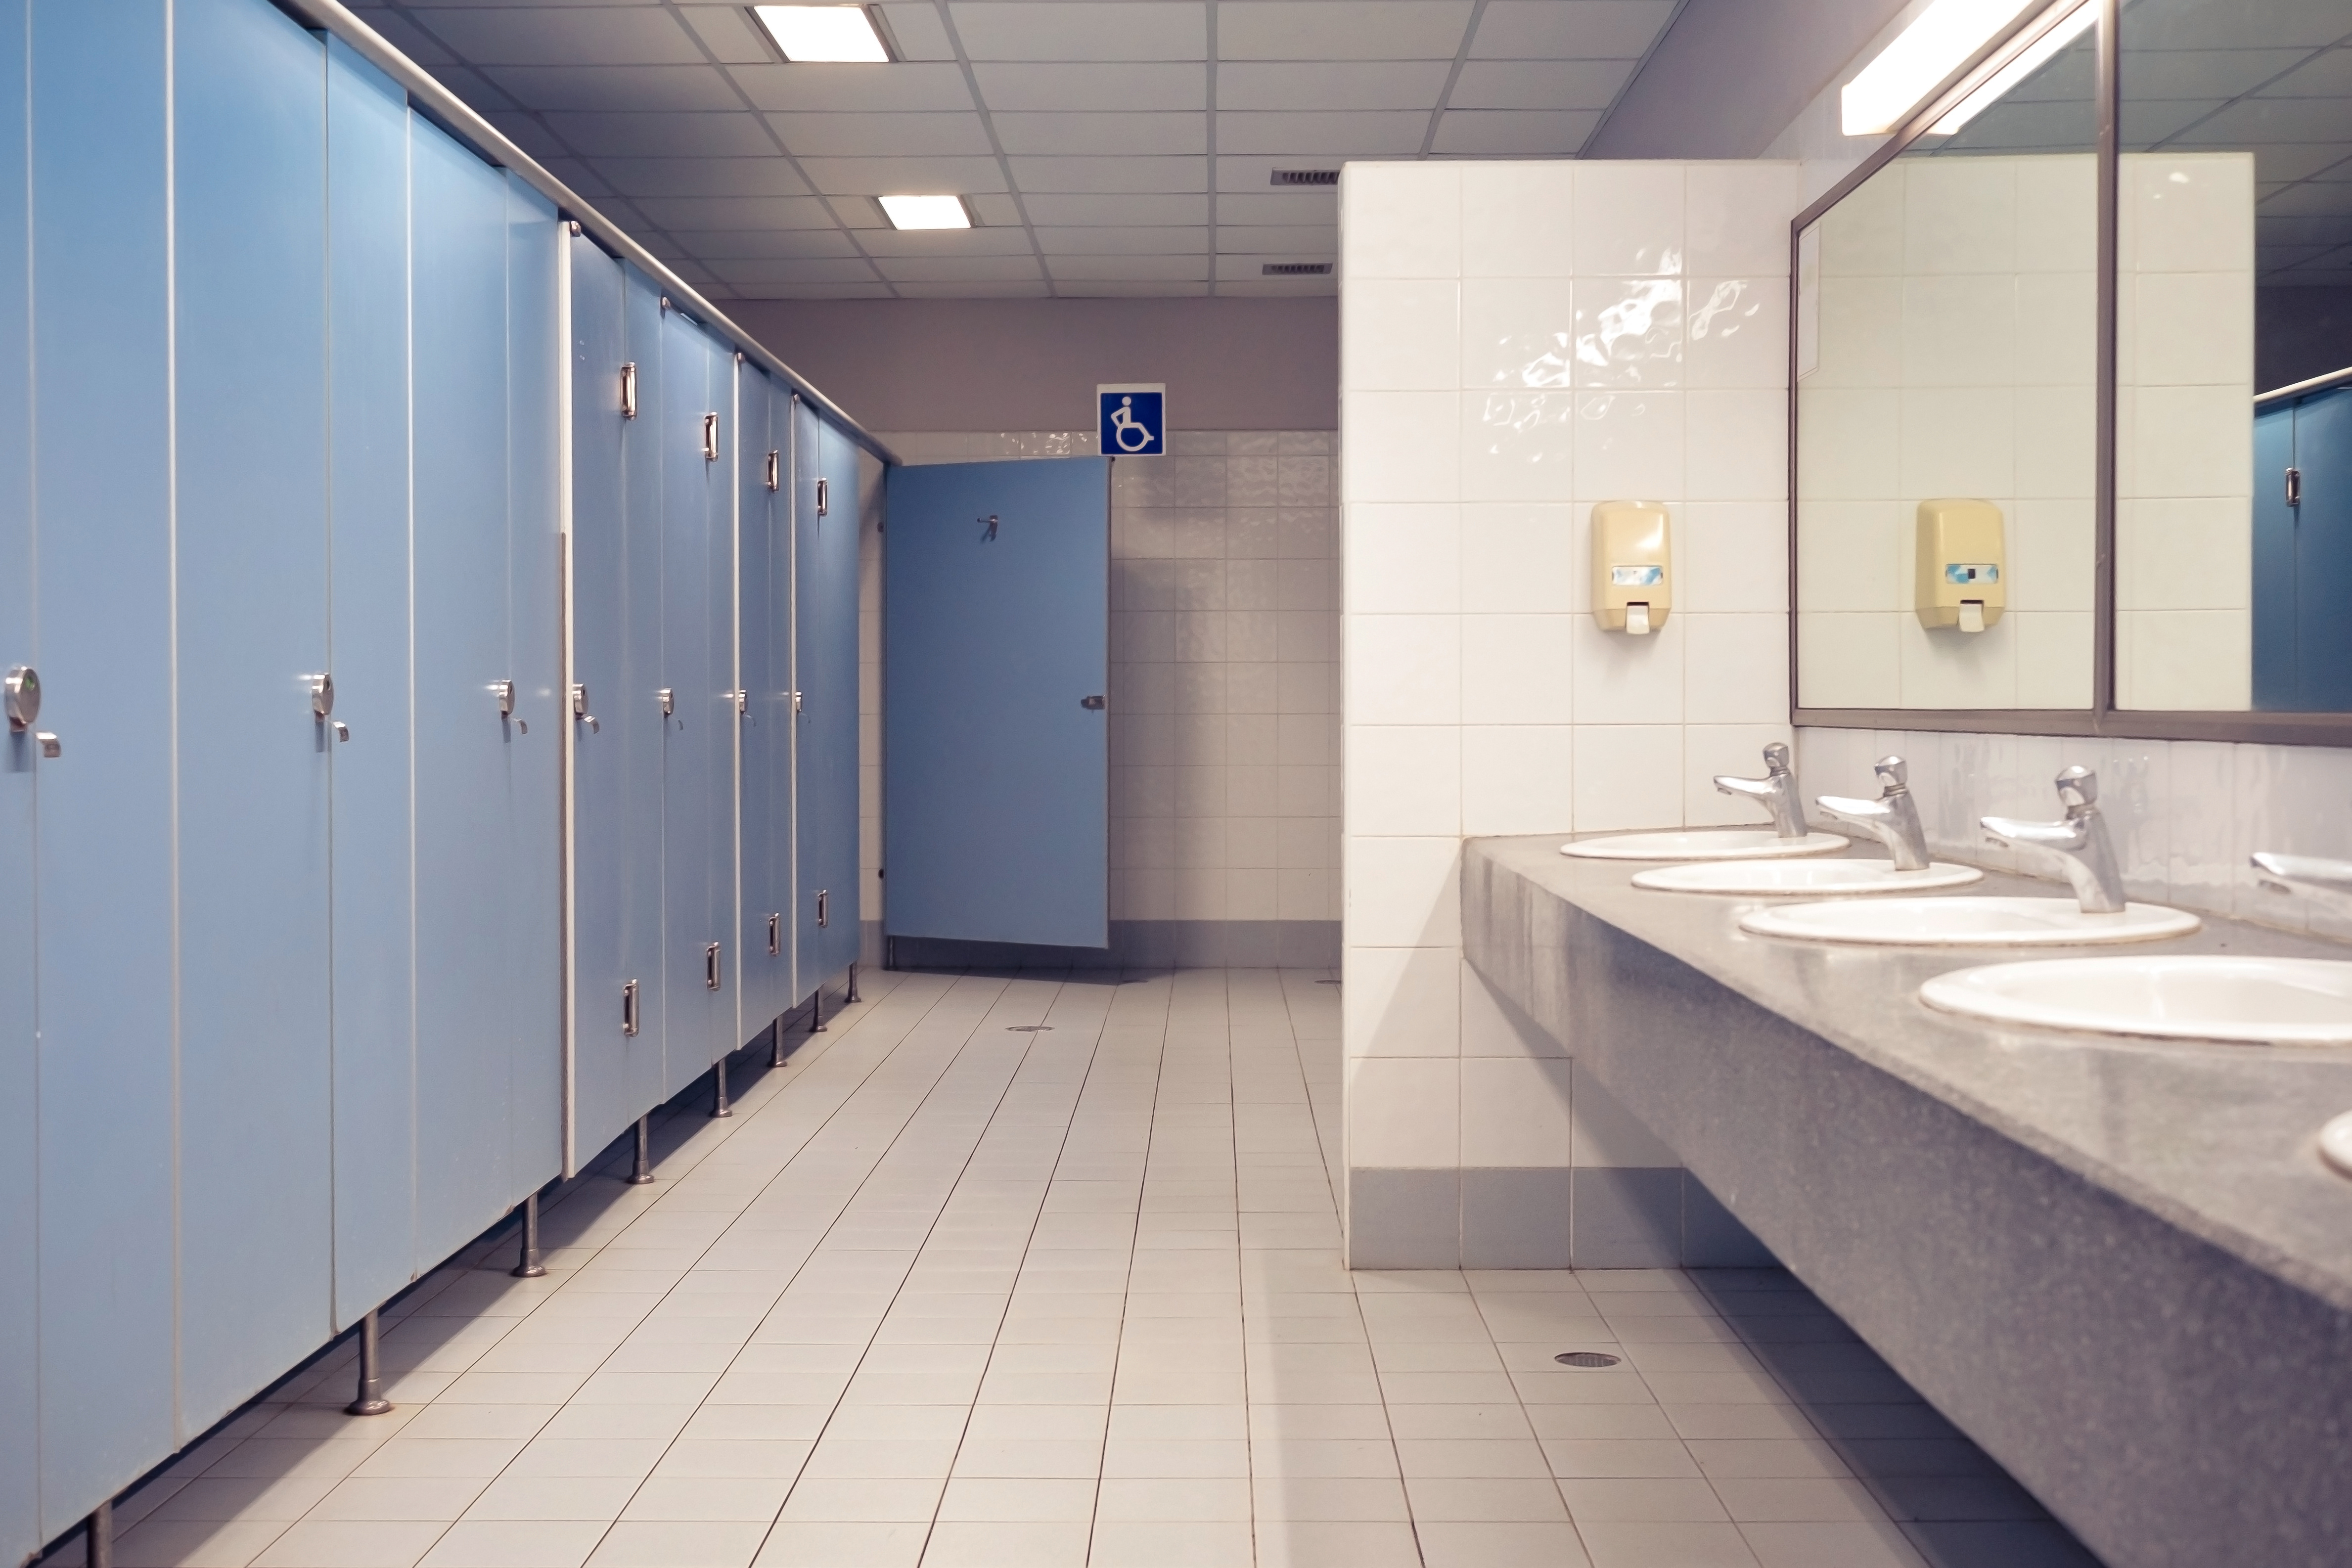 Tips for Using Public Bathrooms During the Coronavirus Pandemic